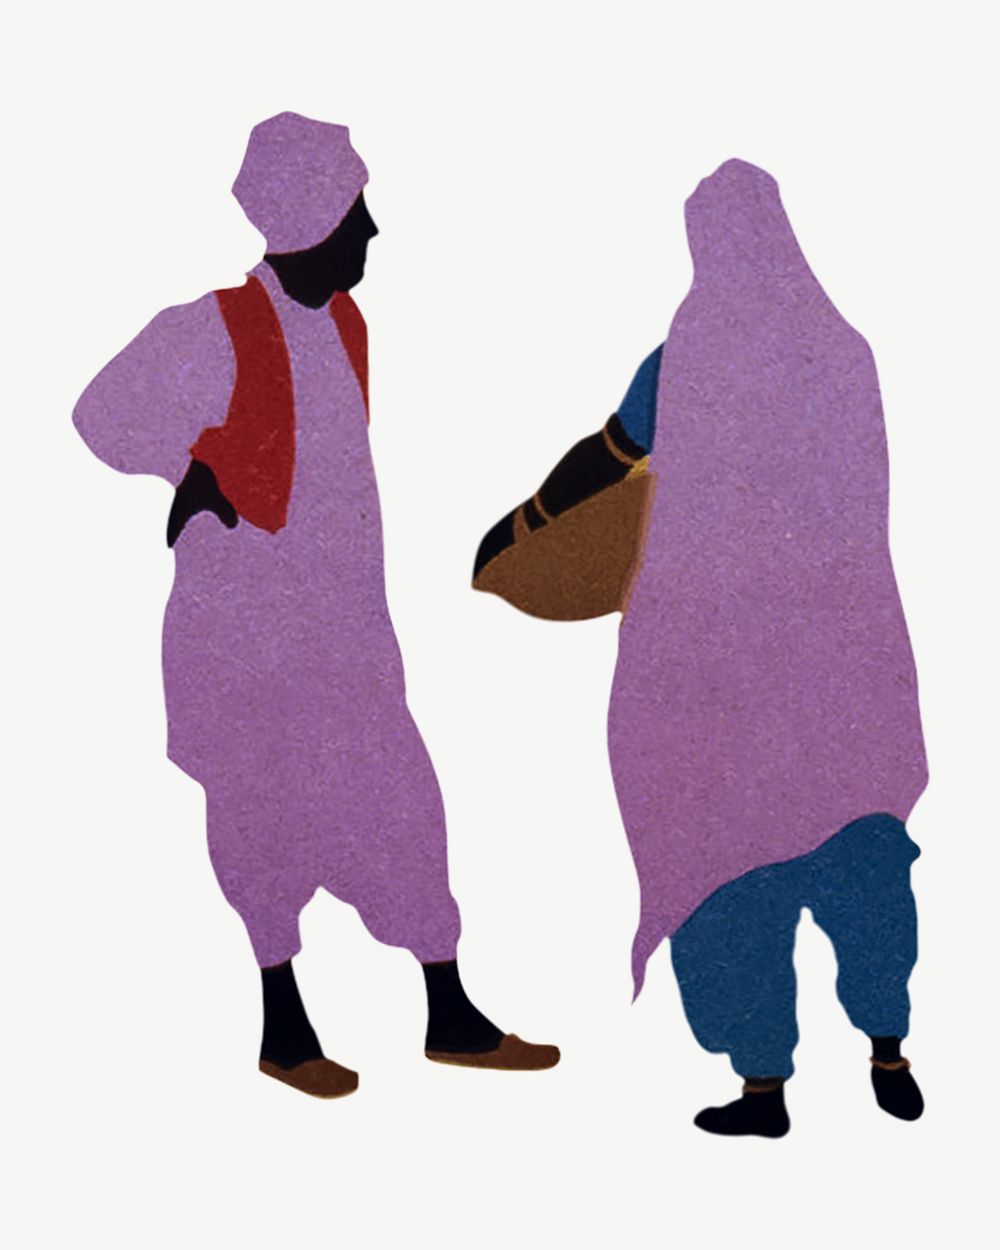 Man & woman in Indian robe silhouette psd. Remixed by rawpixel.